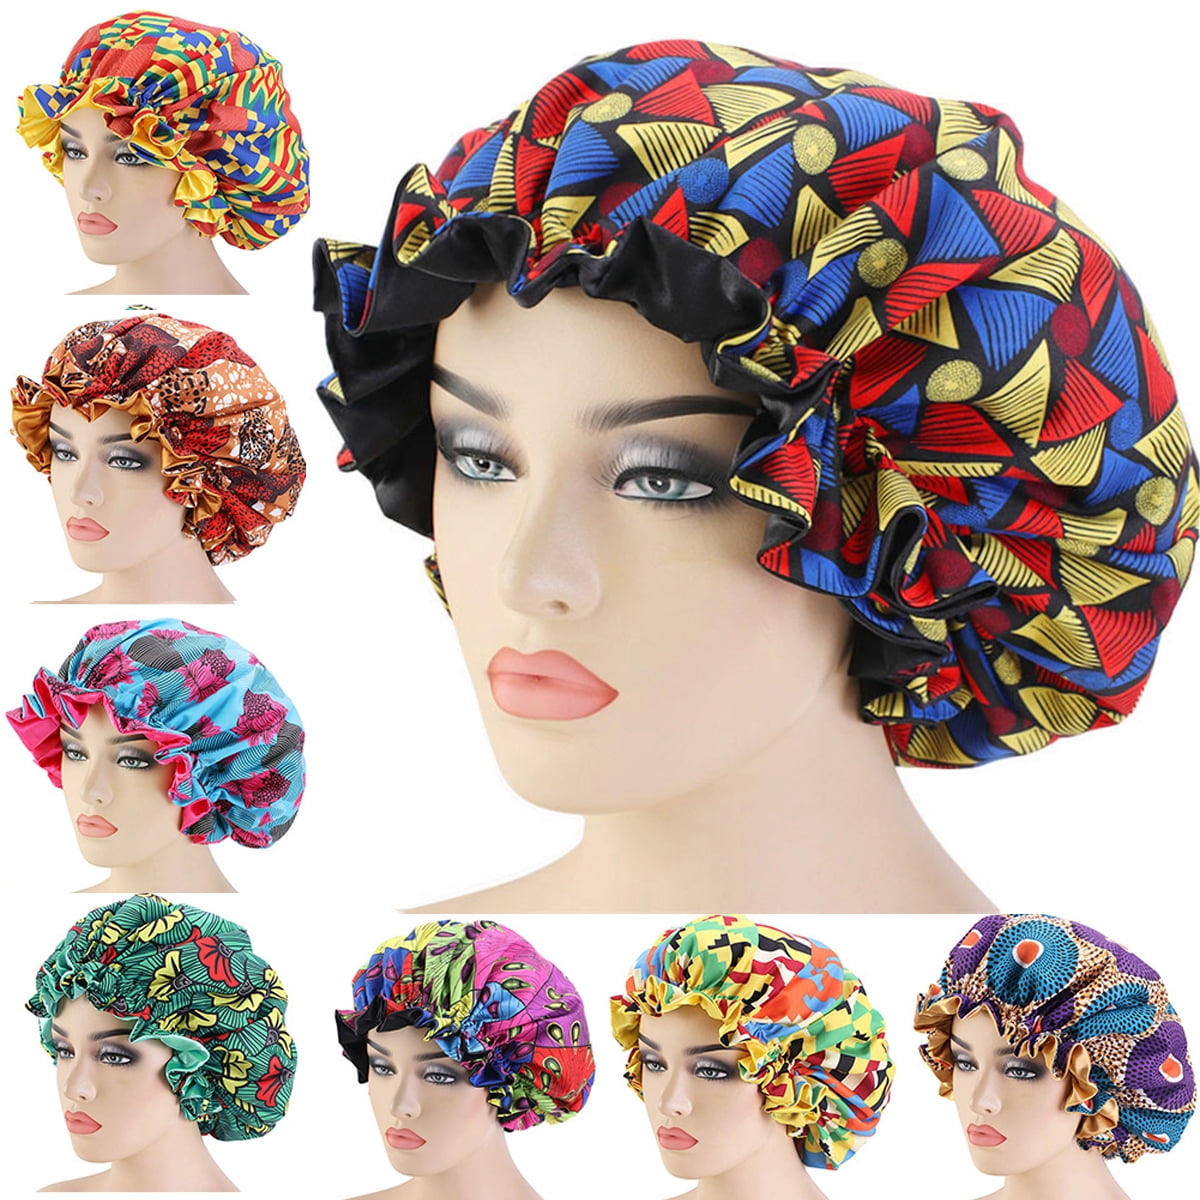 1pc Satin Bonnet Sleep Large Double Layer Reversible Adjustable Night  Sleeping Turban Hat Hair Wrap Head Cover Reusable Nightcap For Girls And  Women Bathroom Accessories, High-quality & Affordable